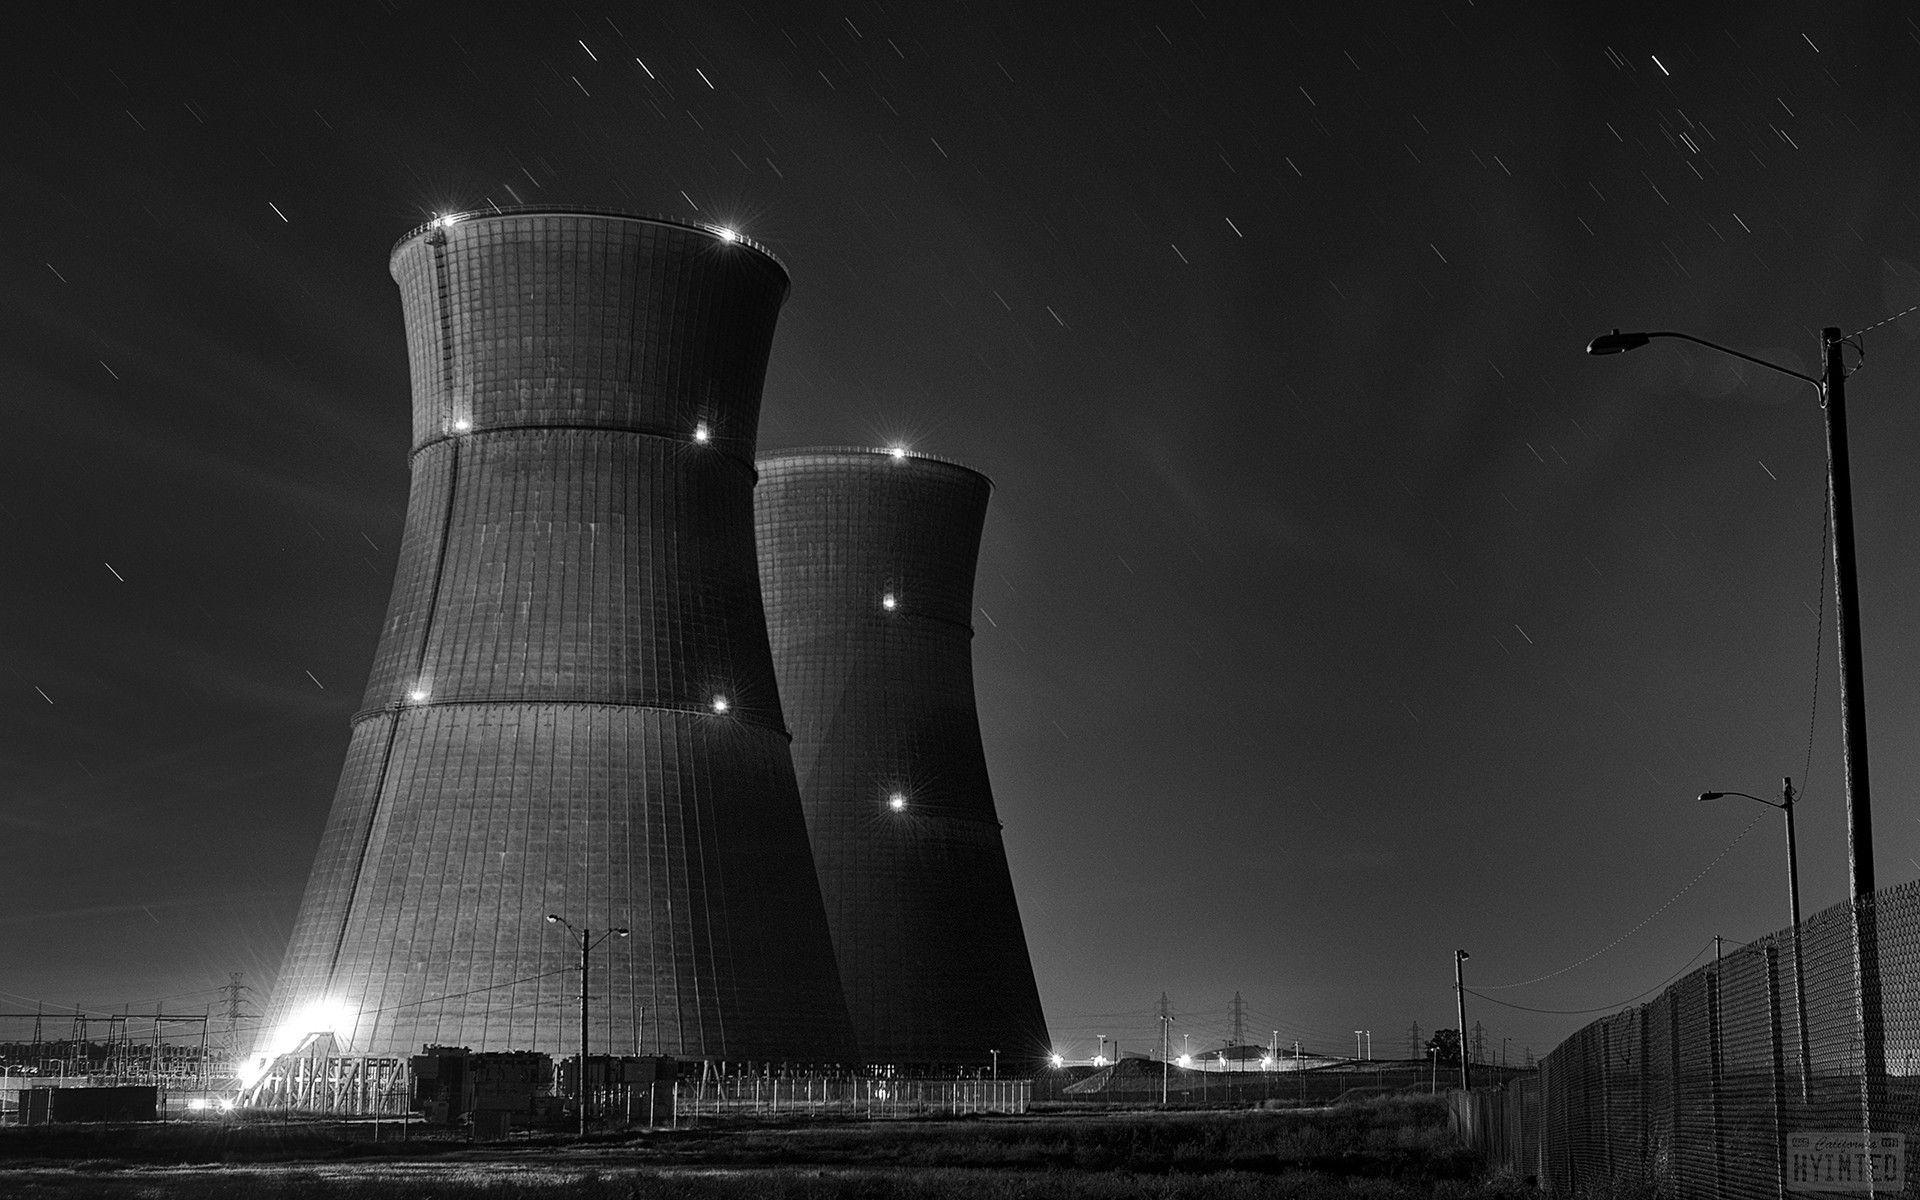 background research on nuclear energy